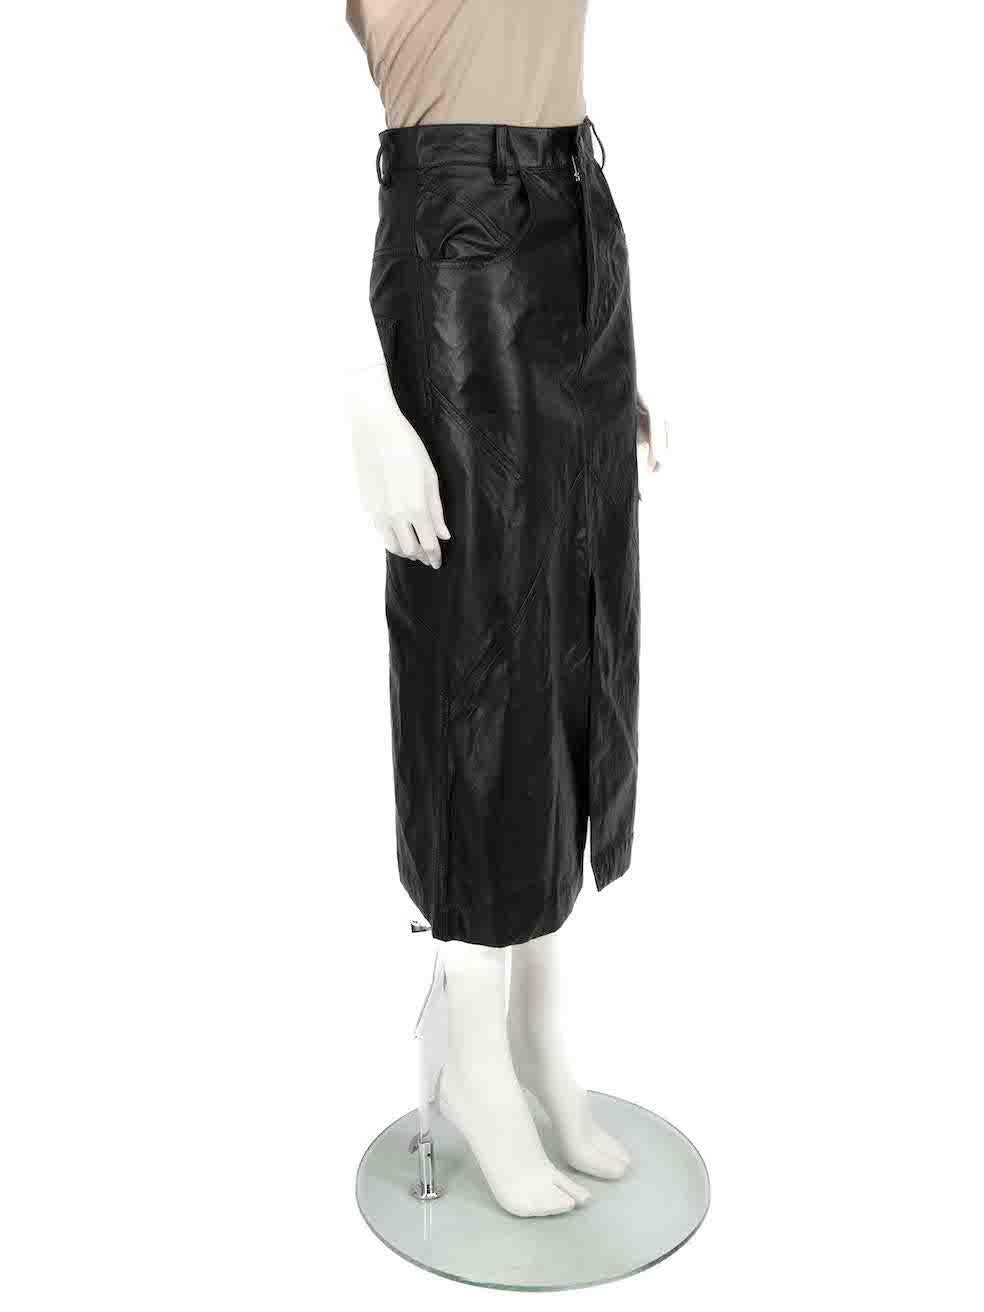 CONDITION is Never worn, with tags. No visible wear to skirt is evident on this new Isabel Marant Etoile designer resale item.
 
 
 
 Details
 
 
 Cecilia model
 
 Black
 
 Faux leather
 
 Fitted skirt
 
 Midi length
 
 Front zip closure with